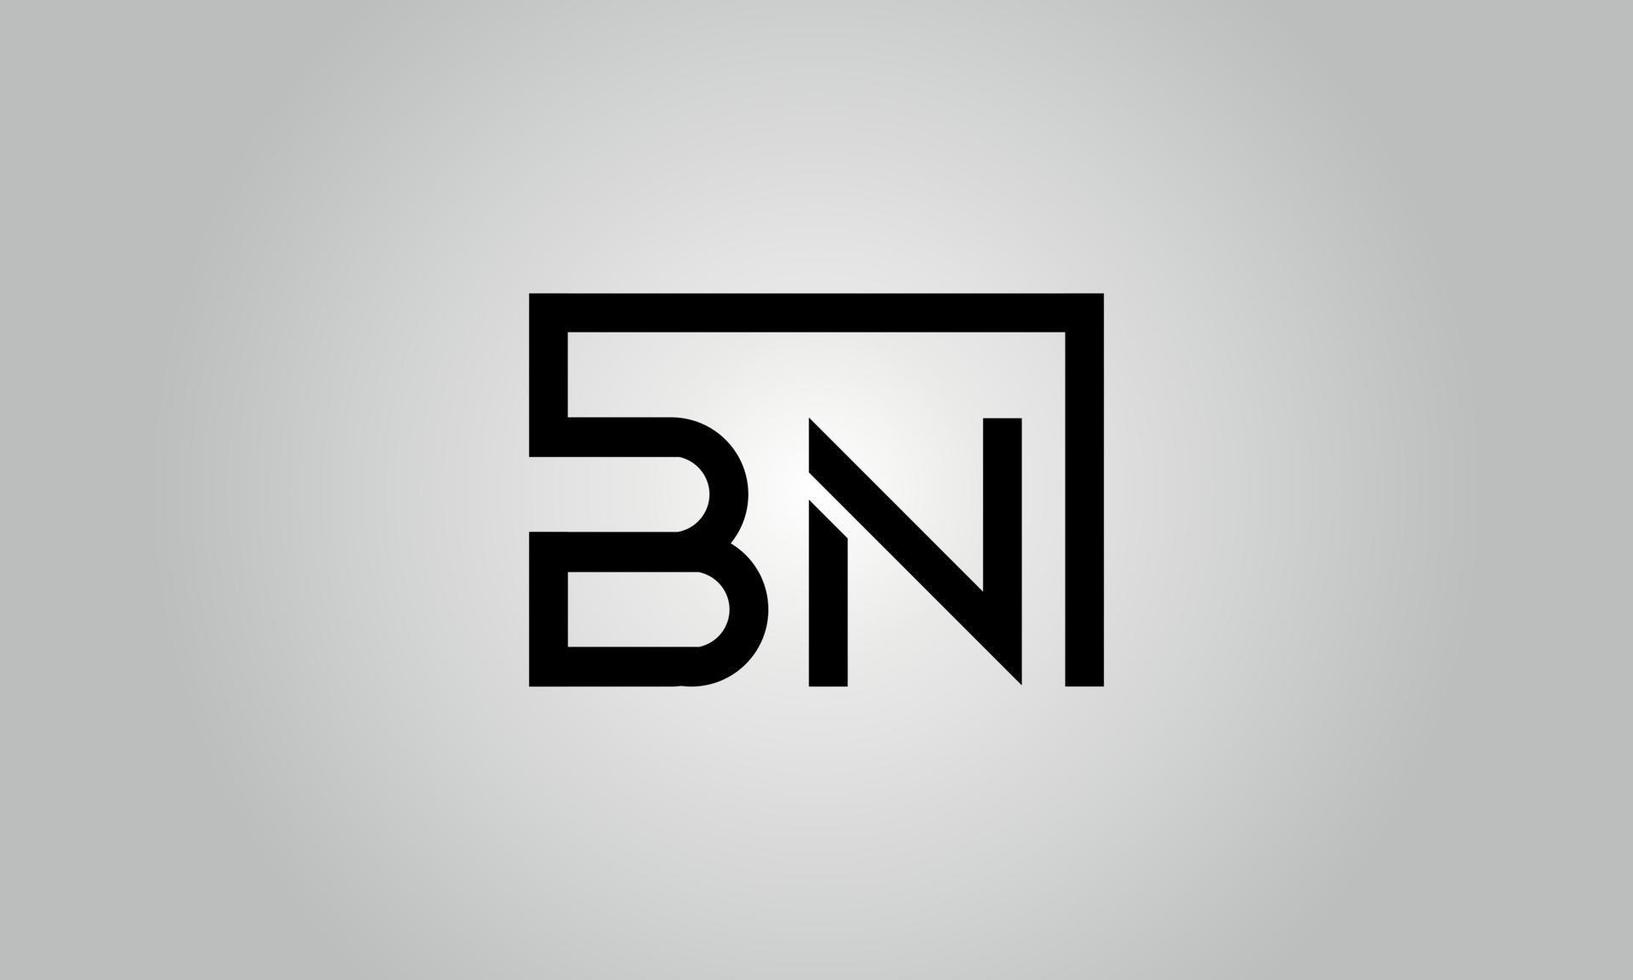 Letter BN logo design. BN logo with square shape in black colors vector free vector template.